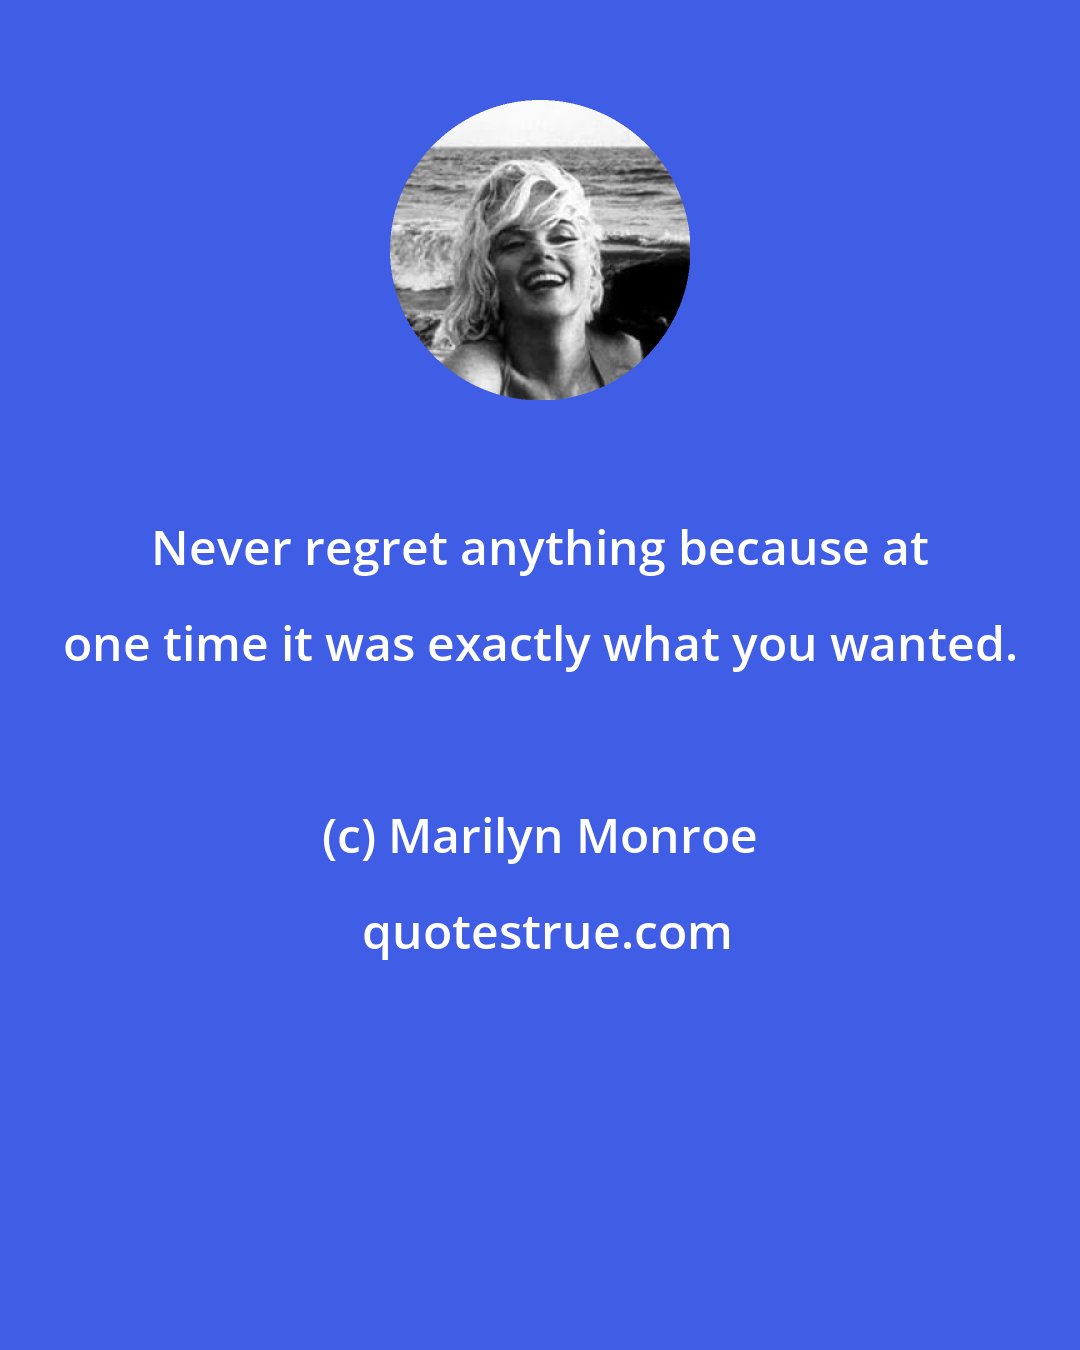 Marilyn Monroe: Never regret anything because at one time it was exactly what you wanted.